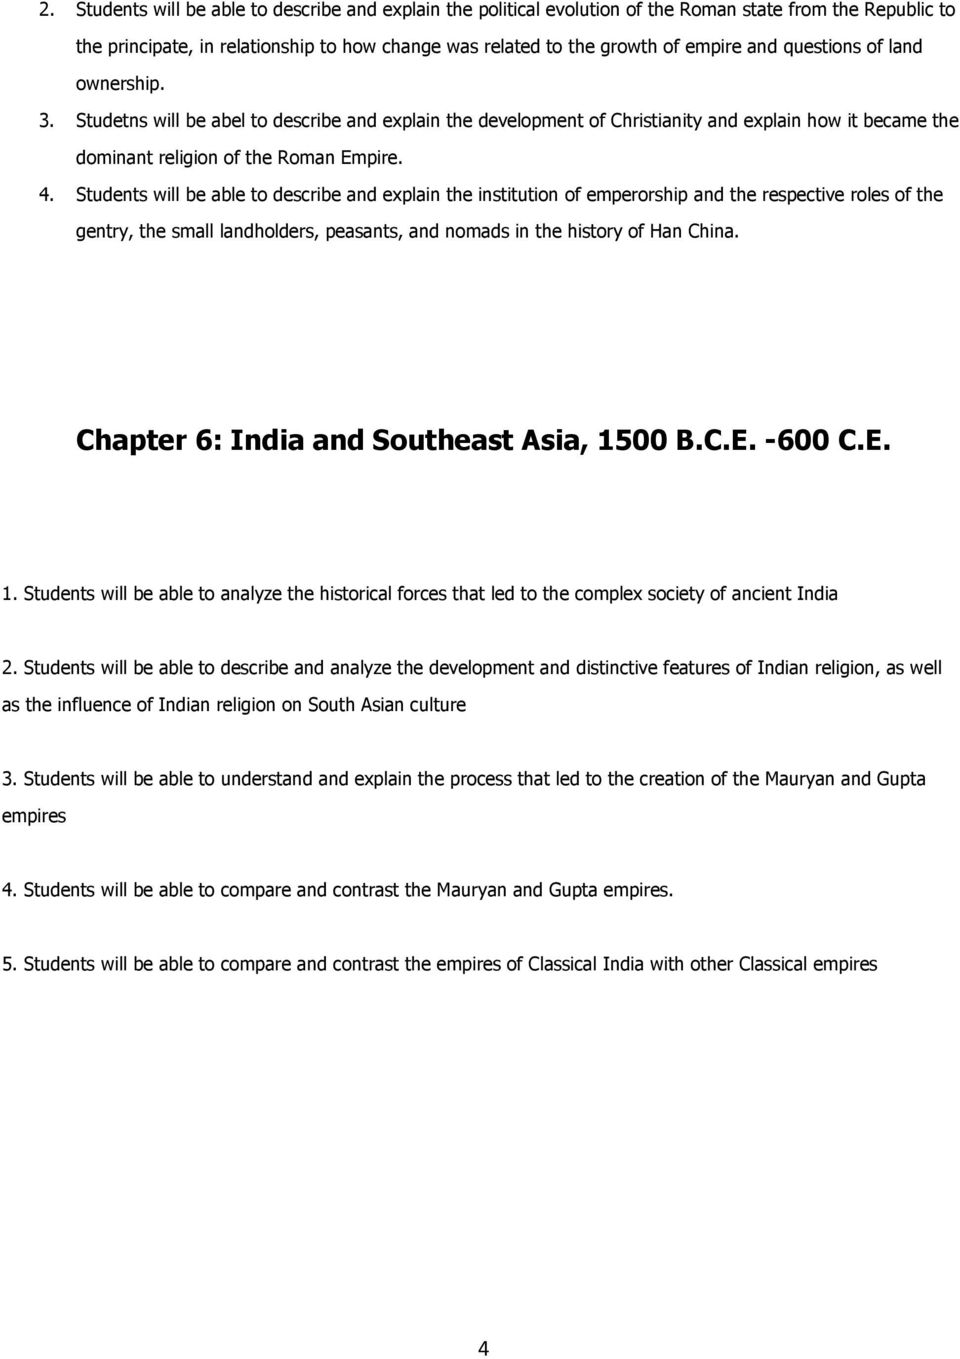 compare and contrast ancient india and china